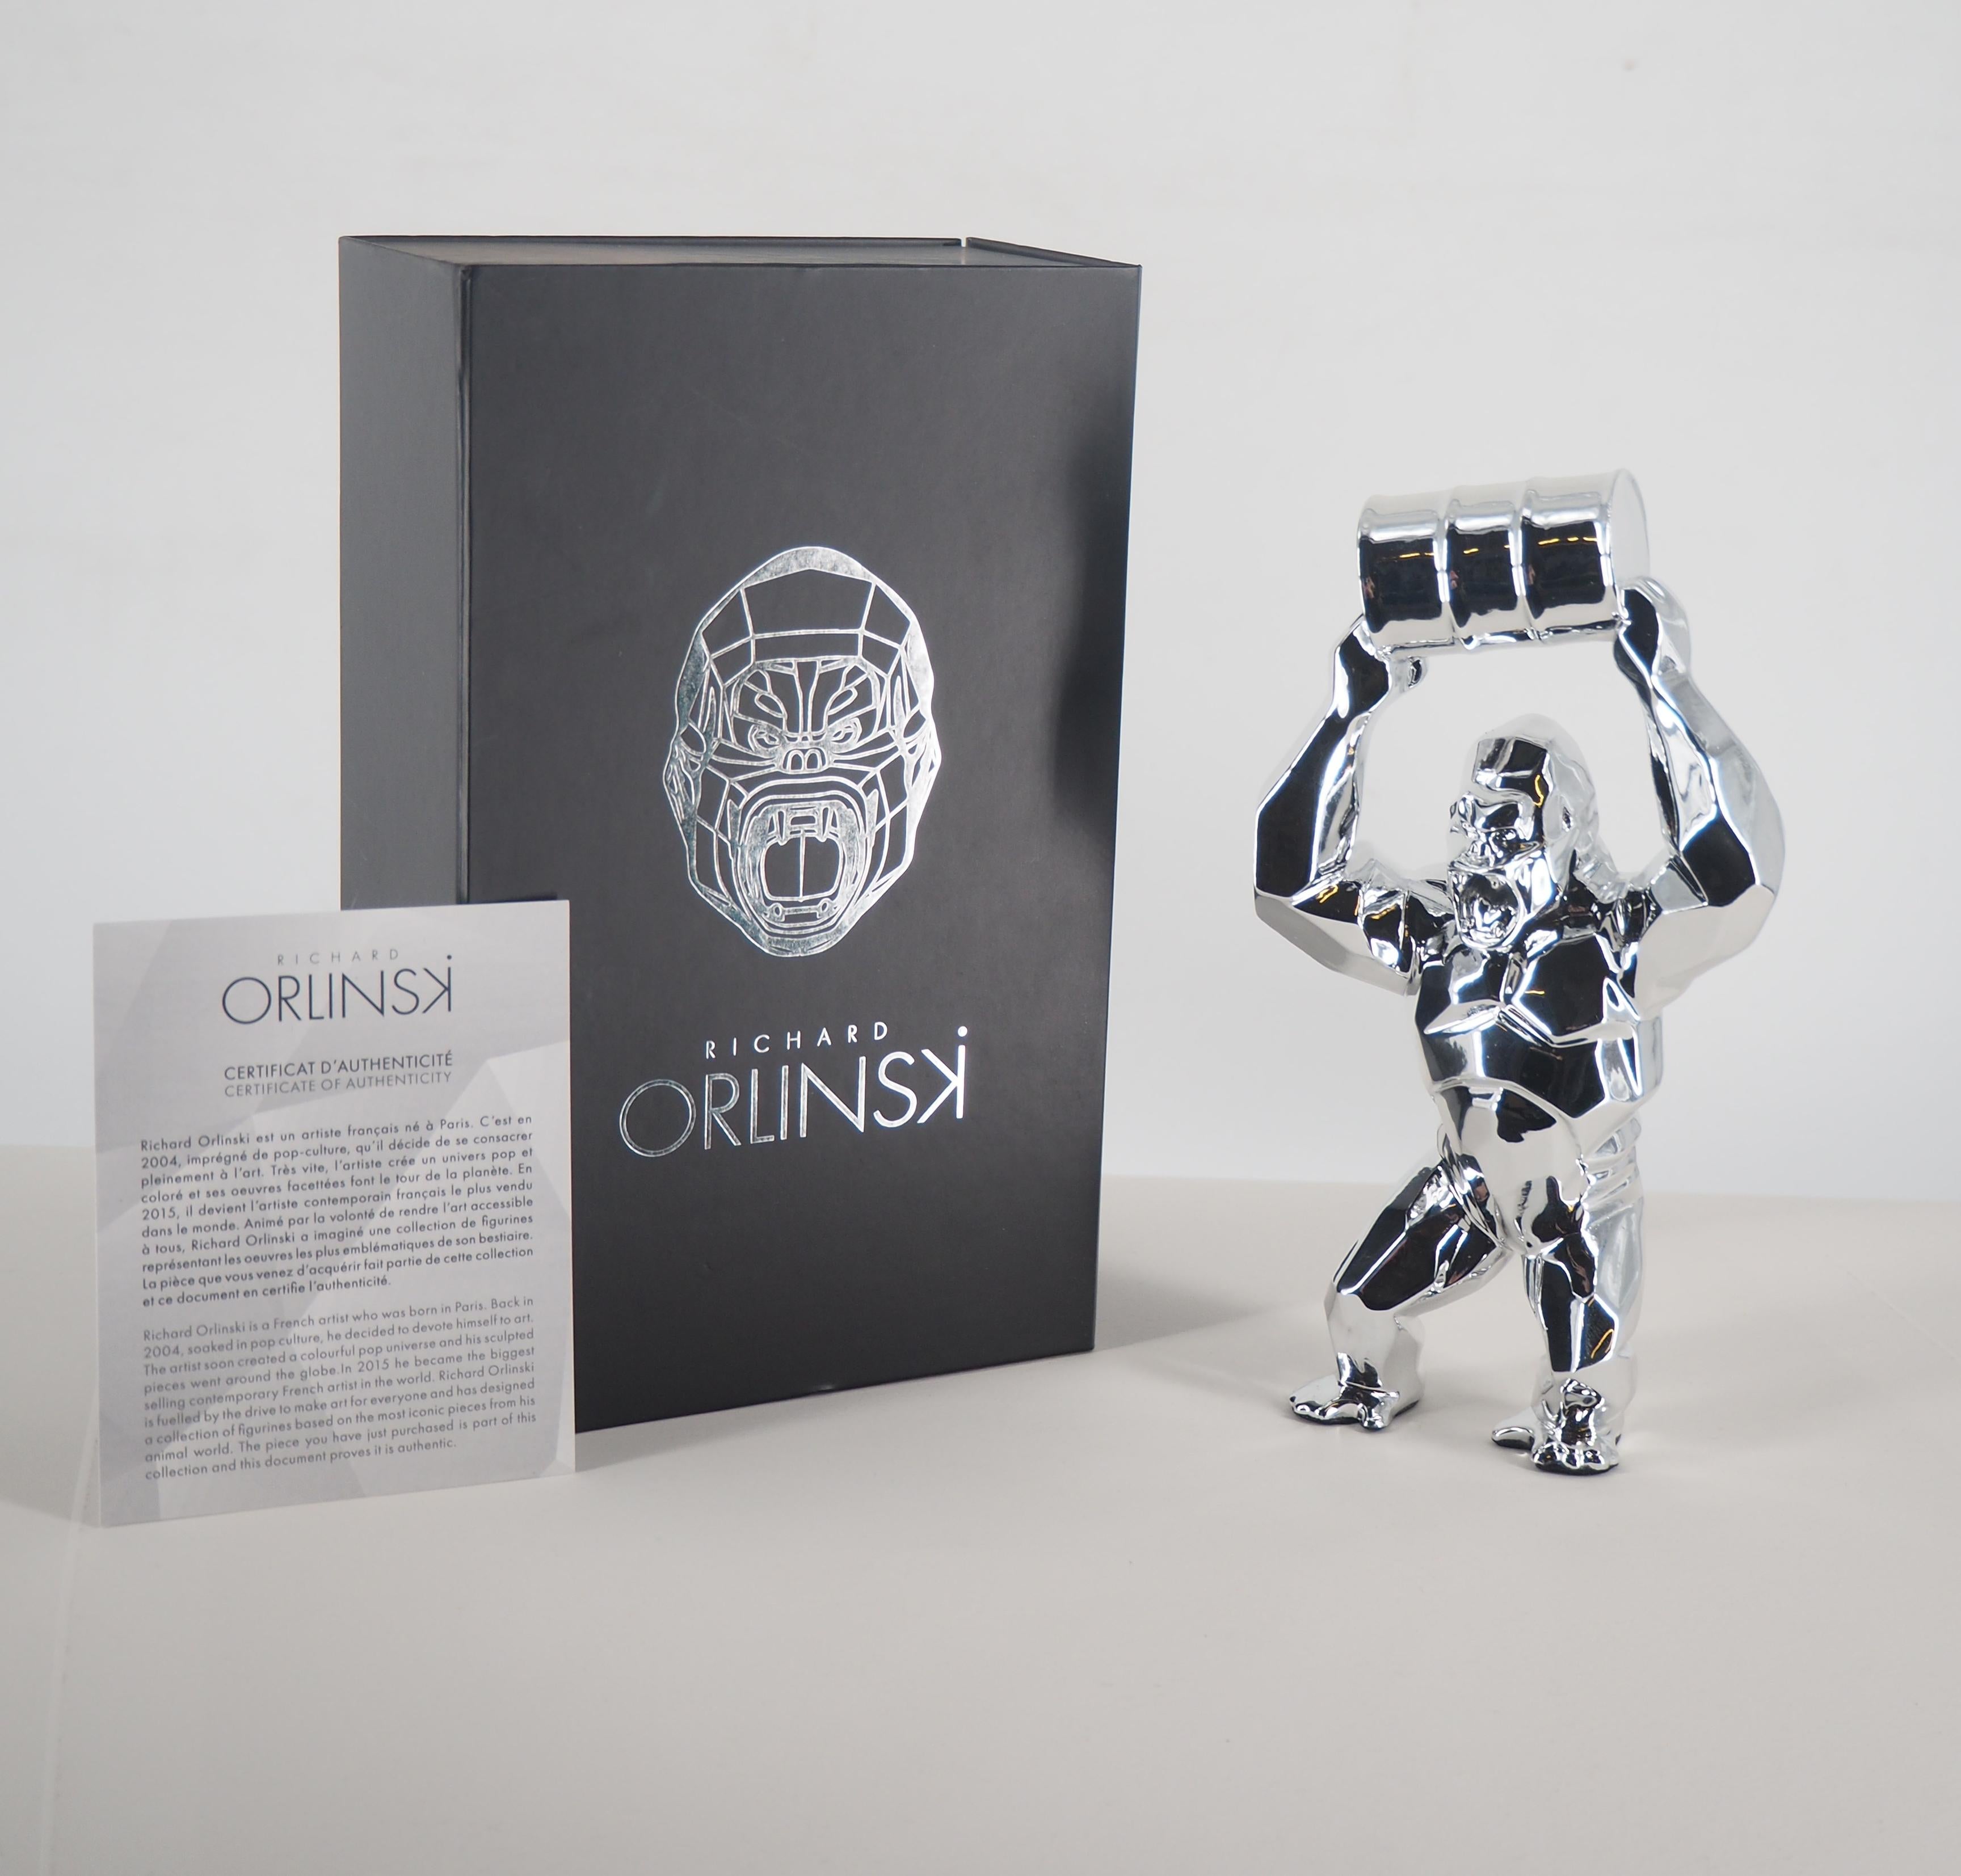 Richard ORLINSKI
Kong Oil Spirit (Silver edition)

Sculpture in resin
Metallic Silver
About 18 x 10 cm (c. 7 x 4 in)
Presented in original box with certificate

Excellent condition